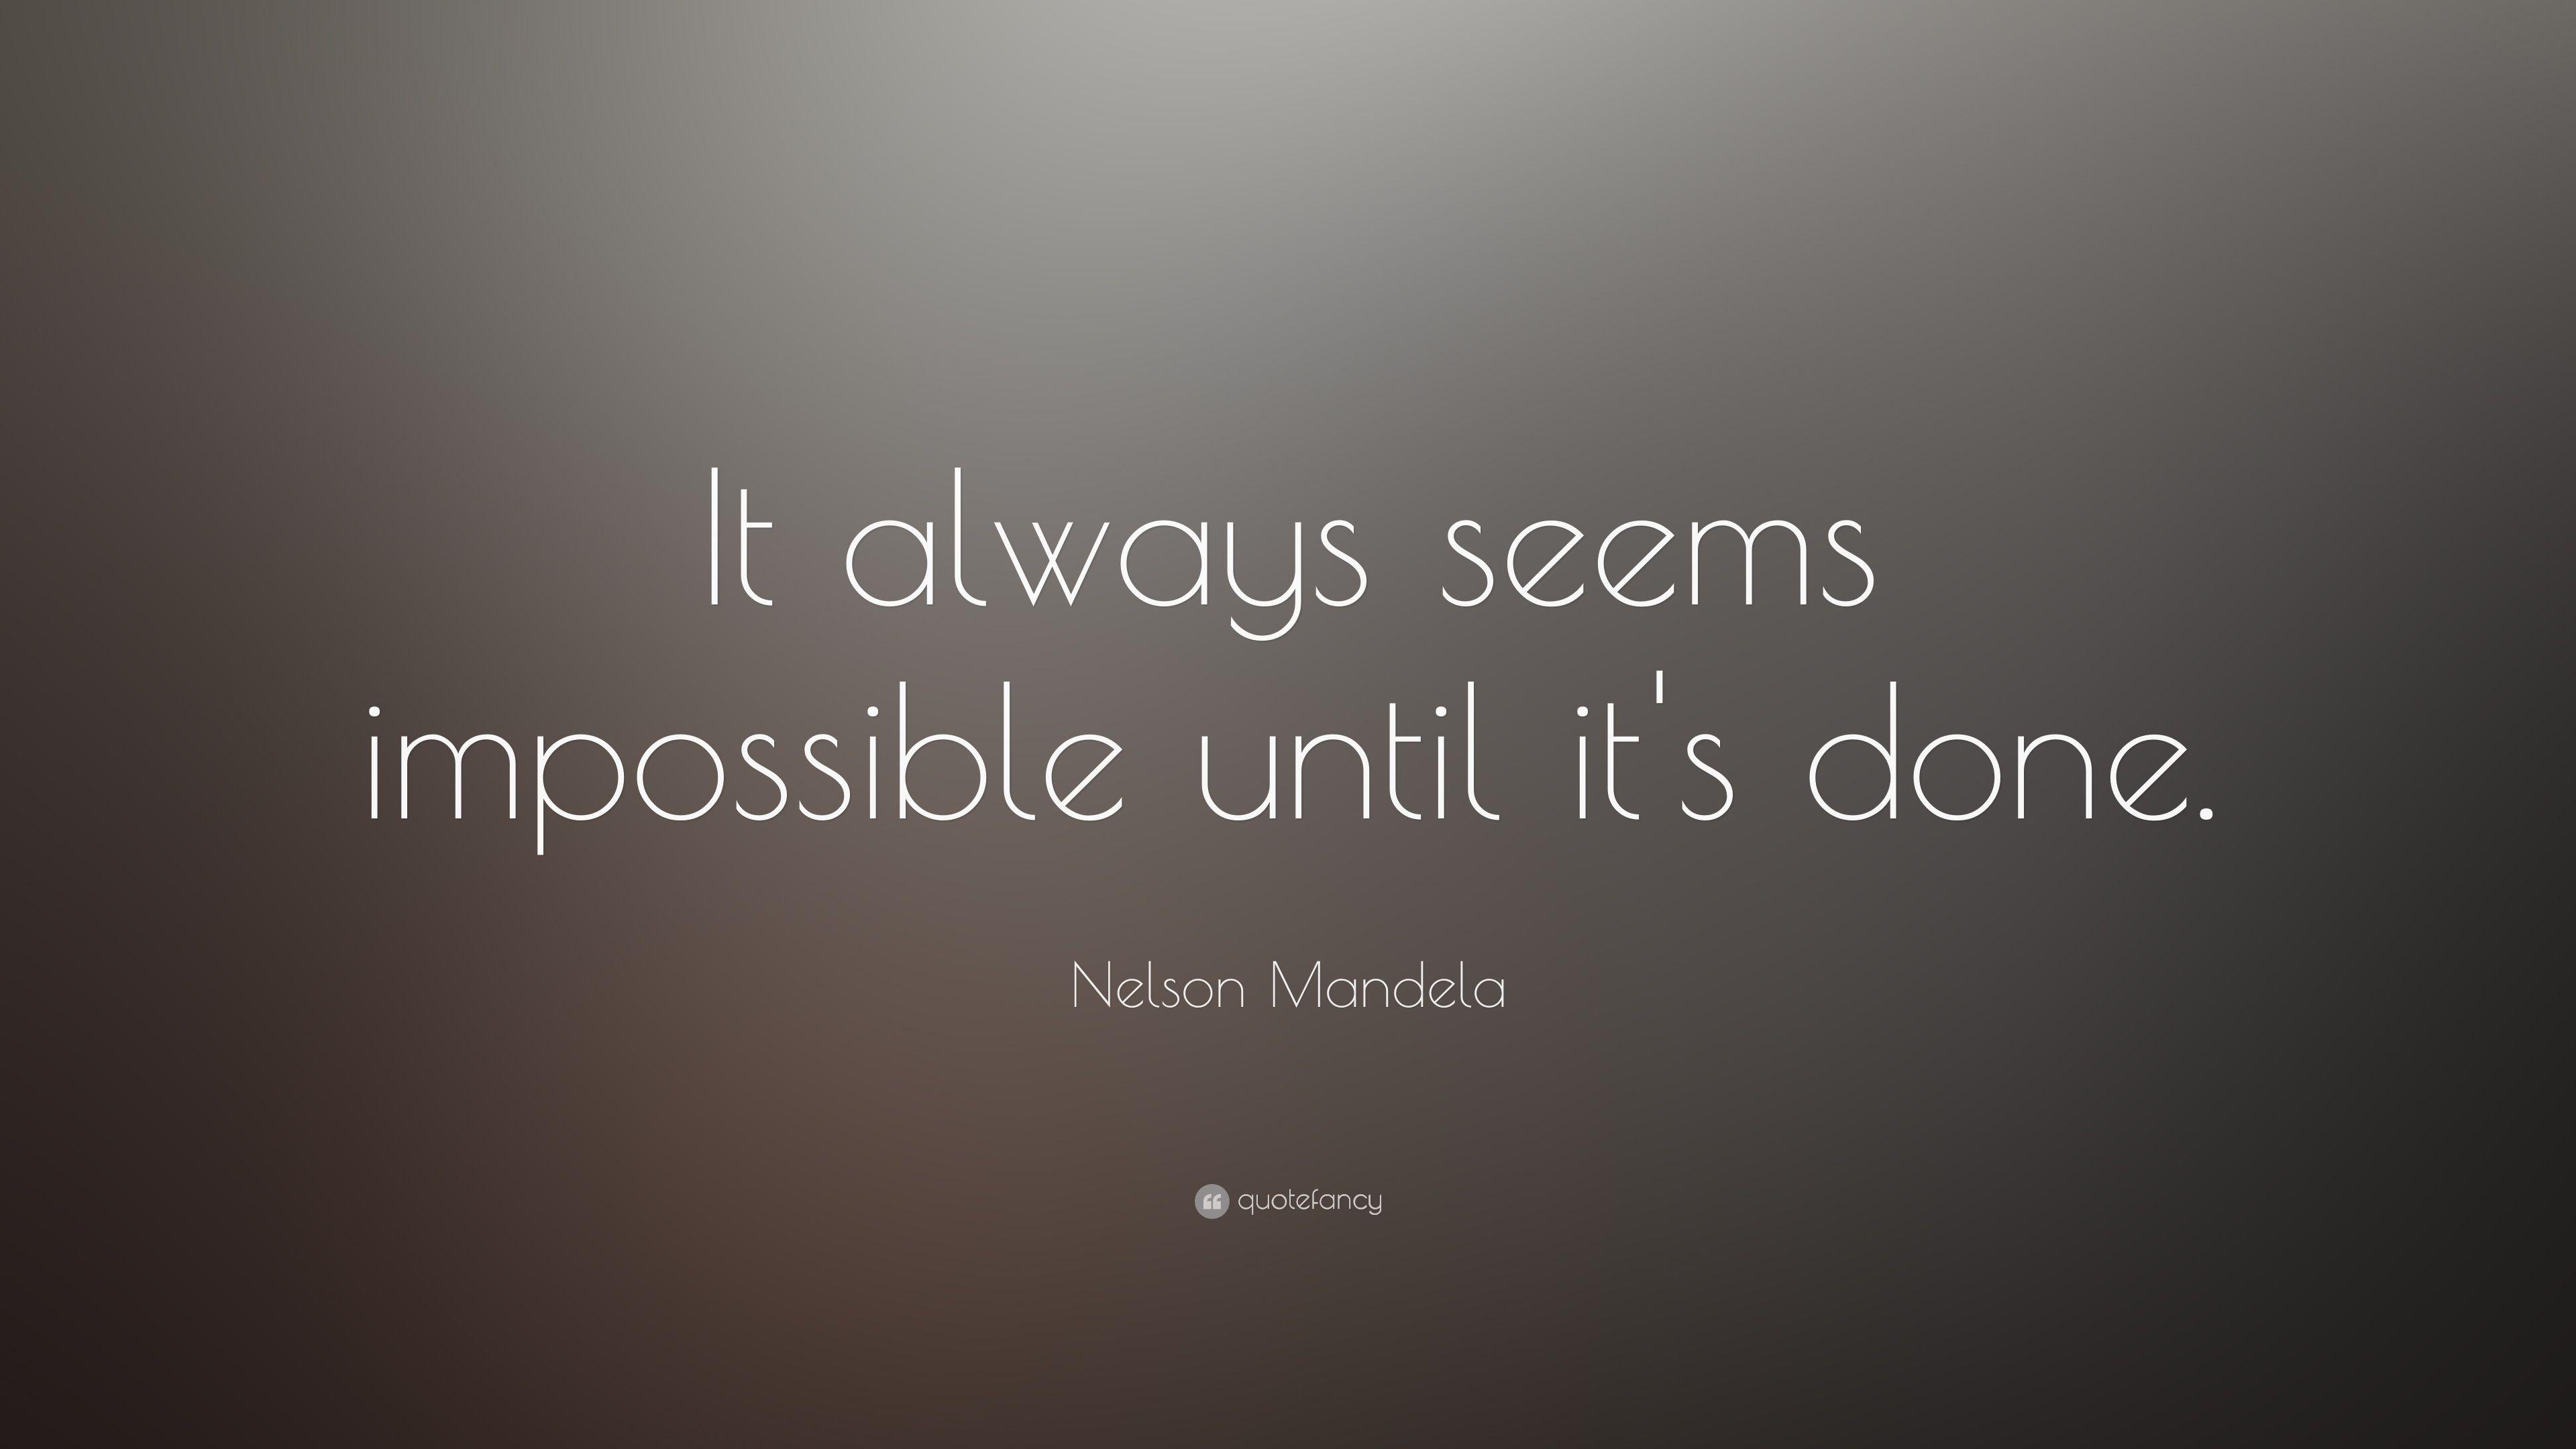 Nelson Mandela Quote: “It always seems impossible until it's done